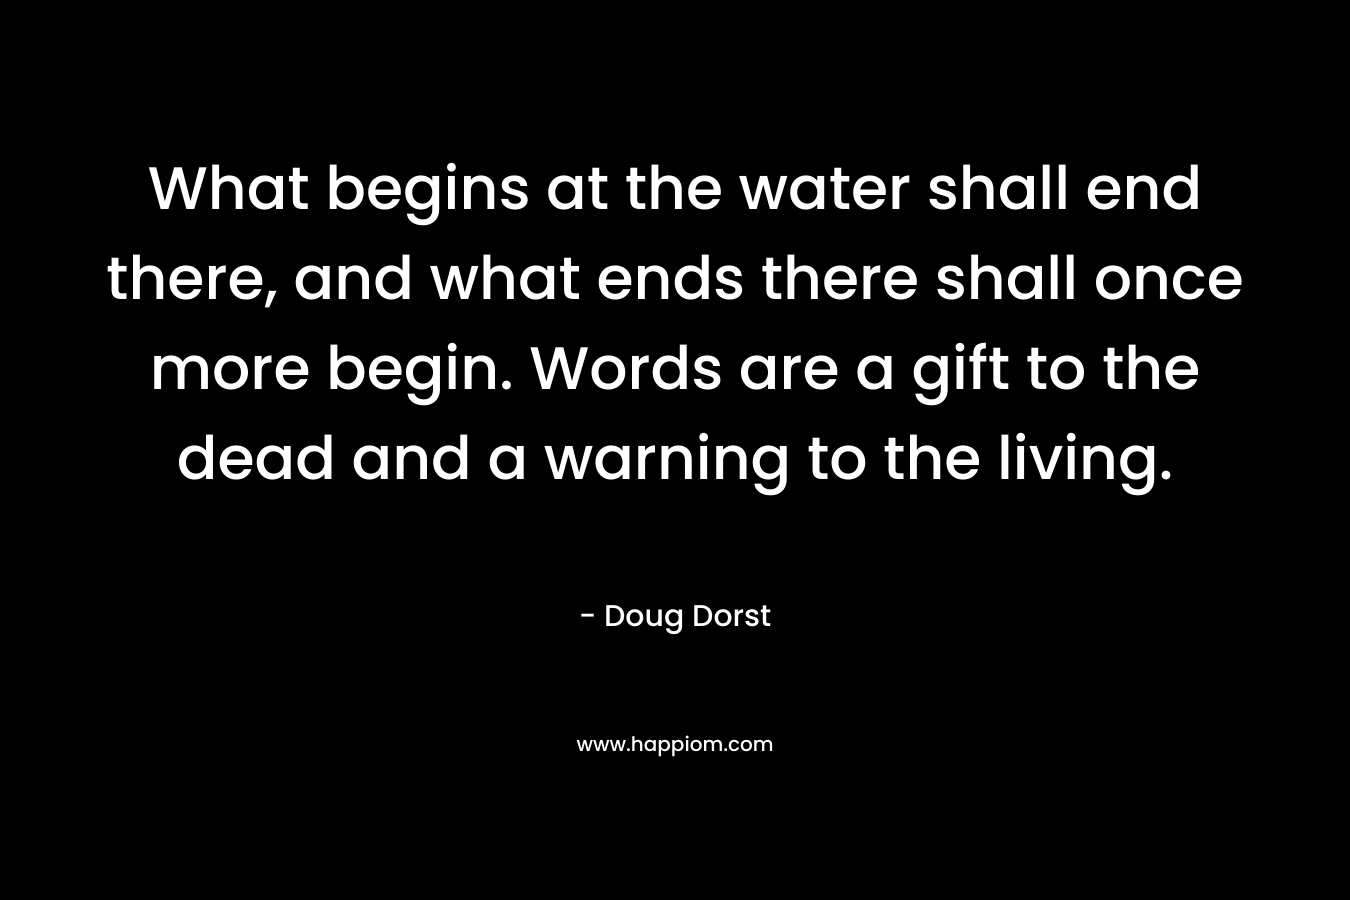 What begins at the water shall end there, and what ends there shall once more begin. Words are a gift to the dead and a warning to the living. – Doug Dorst